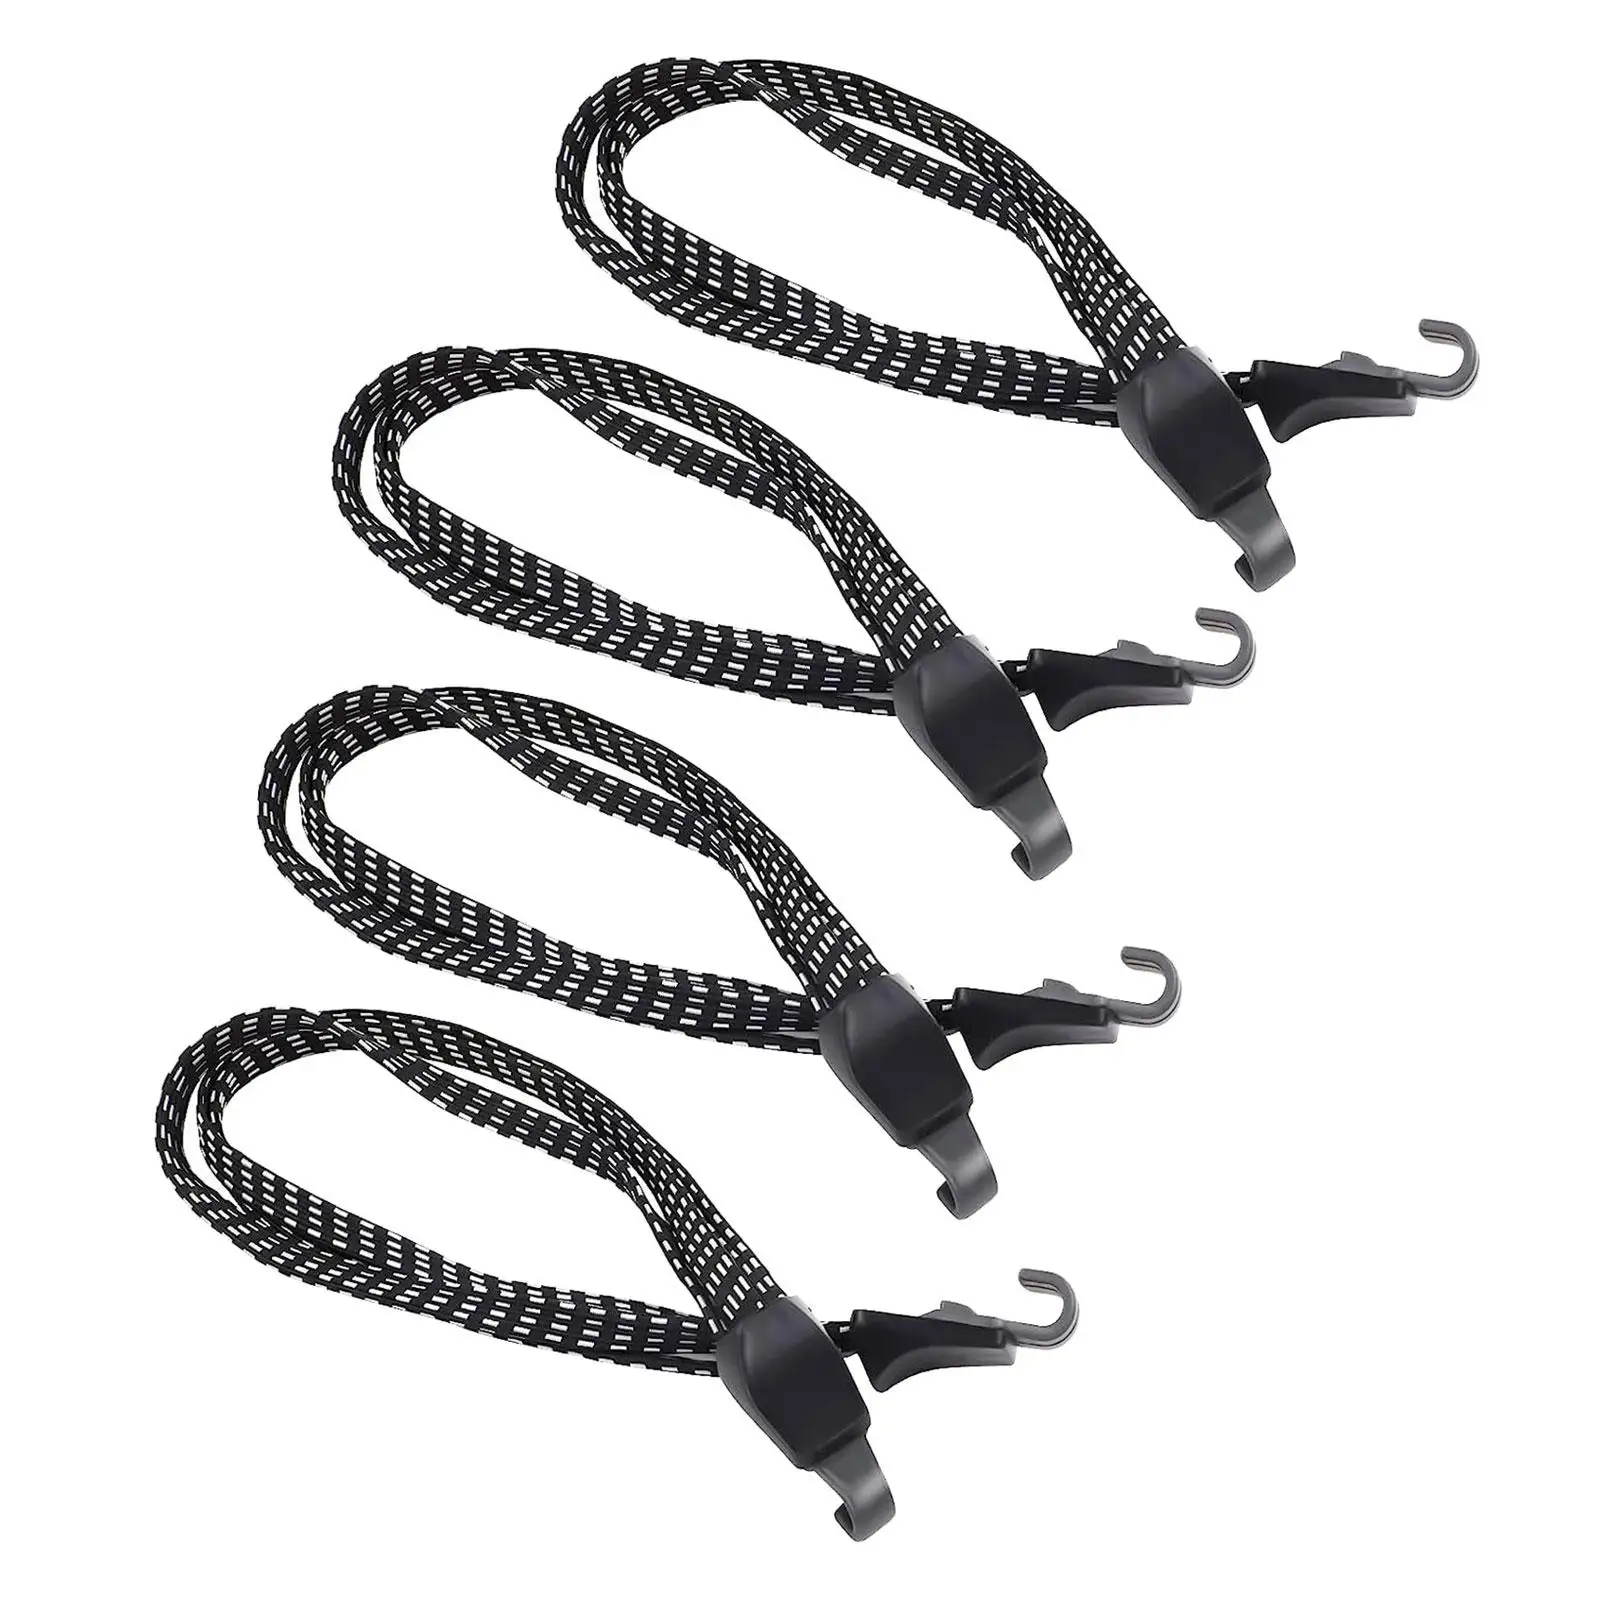 4Pcs Motorcycle Luggage Straps Strong Bike Luggage Rope for Cargo RV Camping